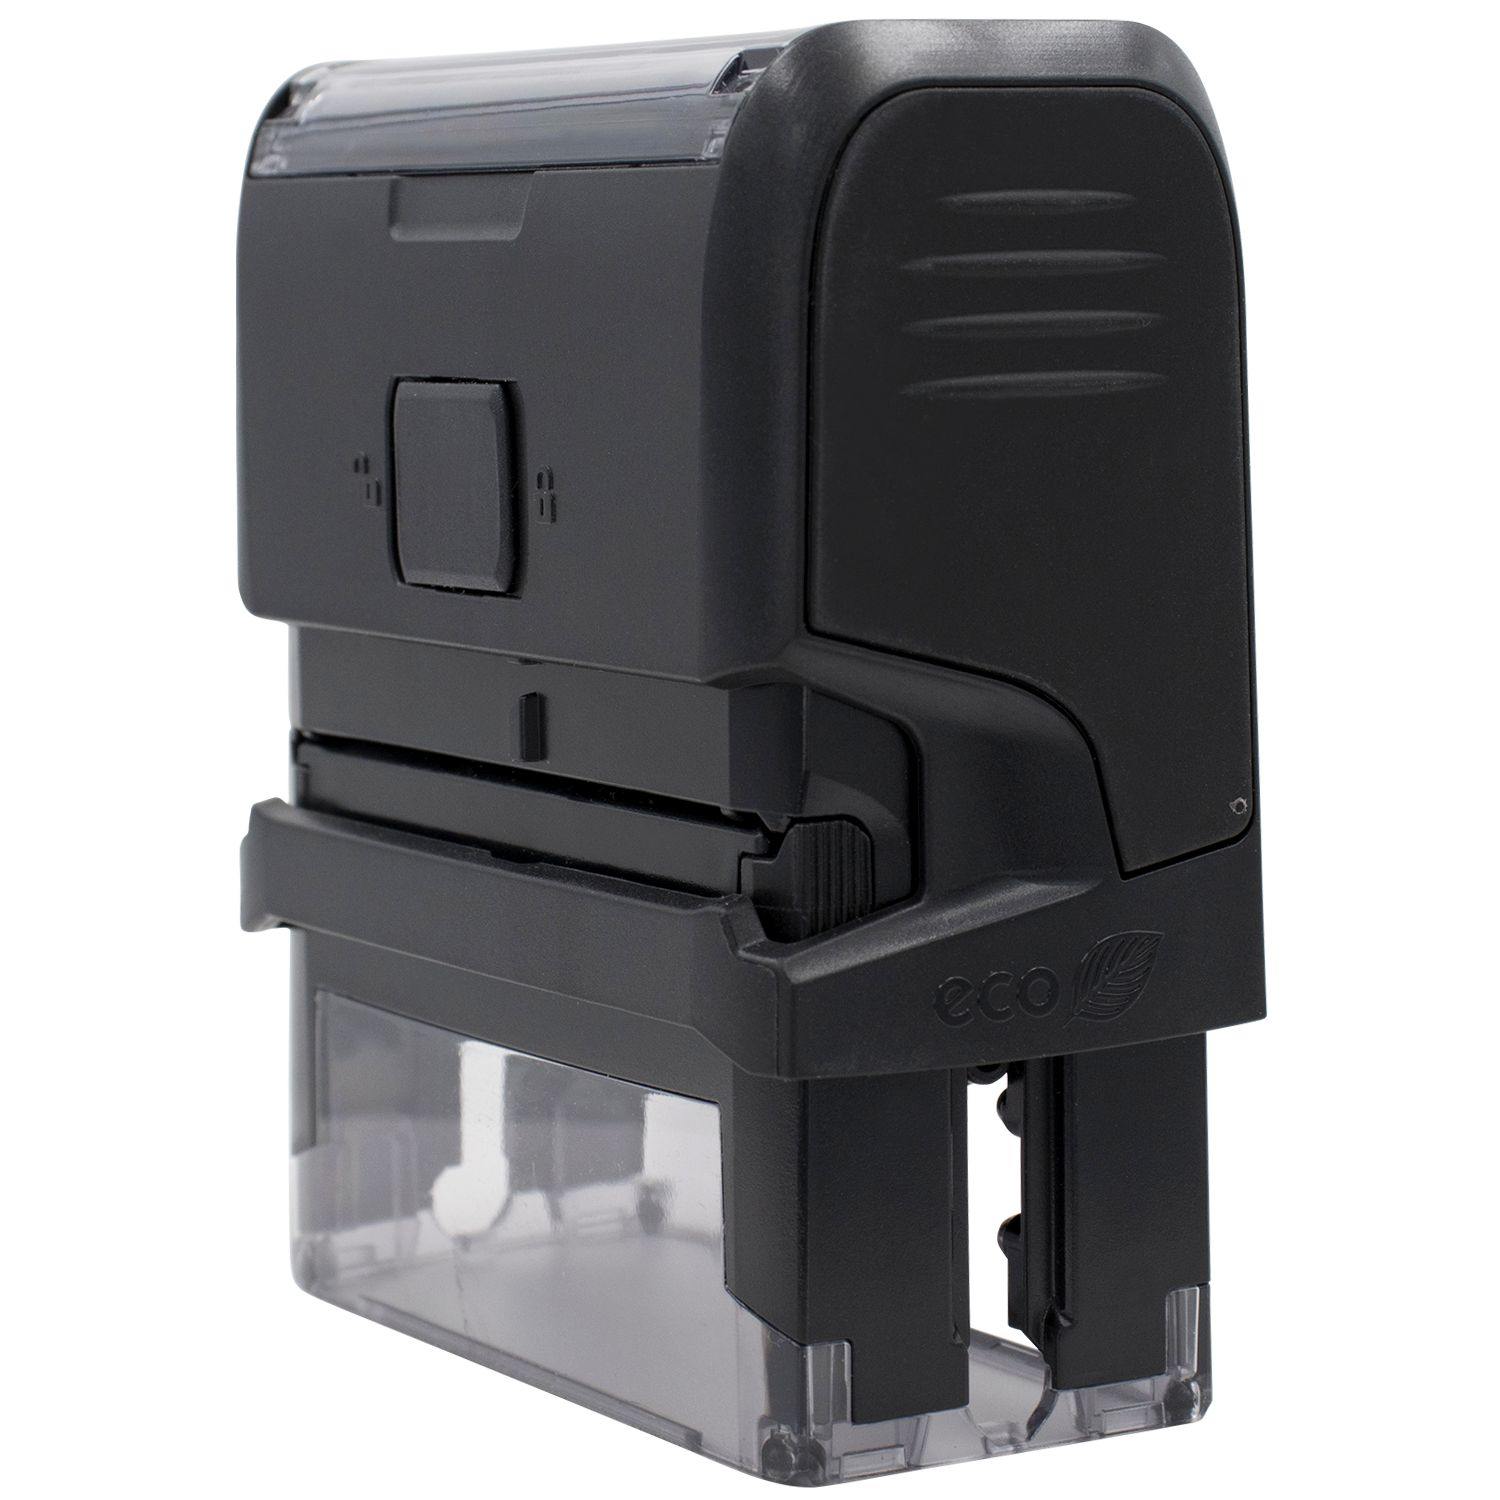 Side View of Large Self Inking Clients Copy Stamp at an Angle